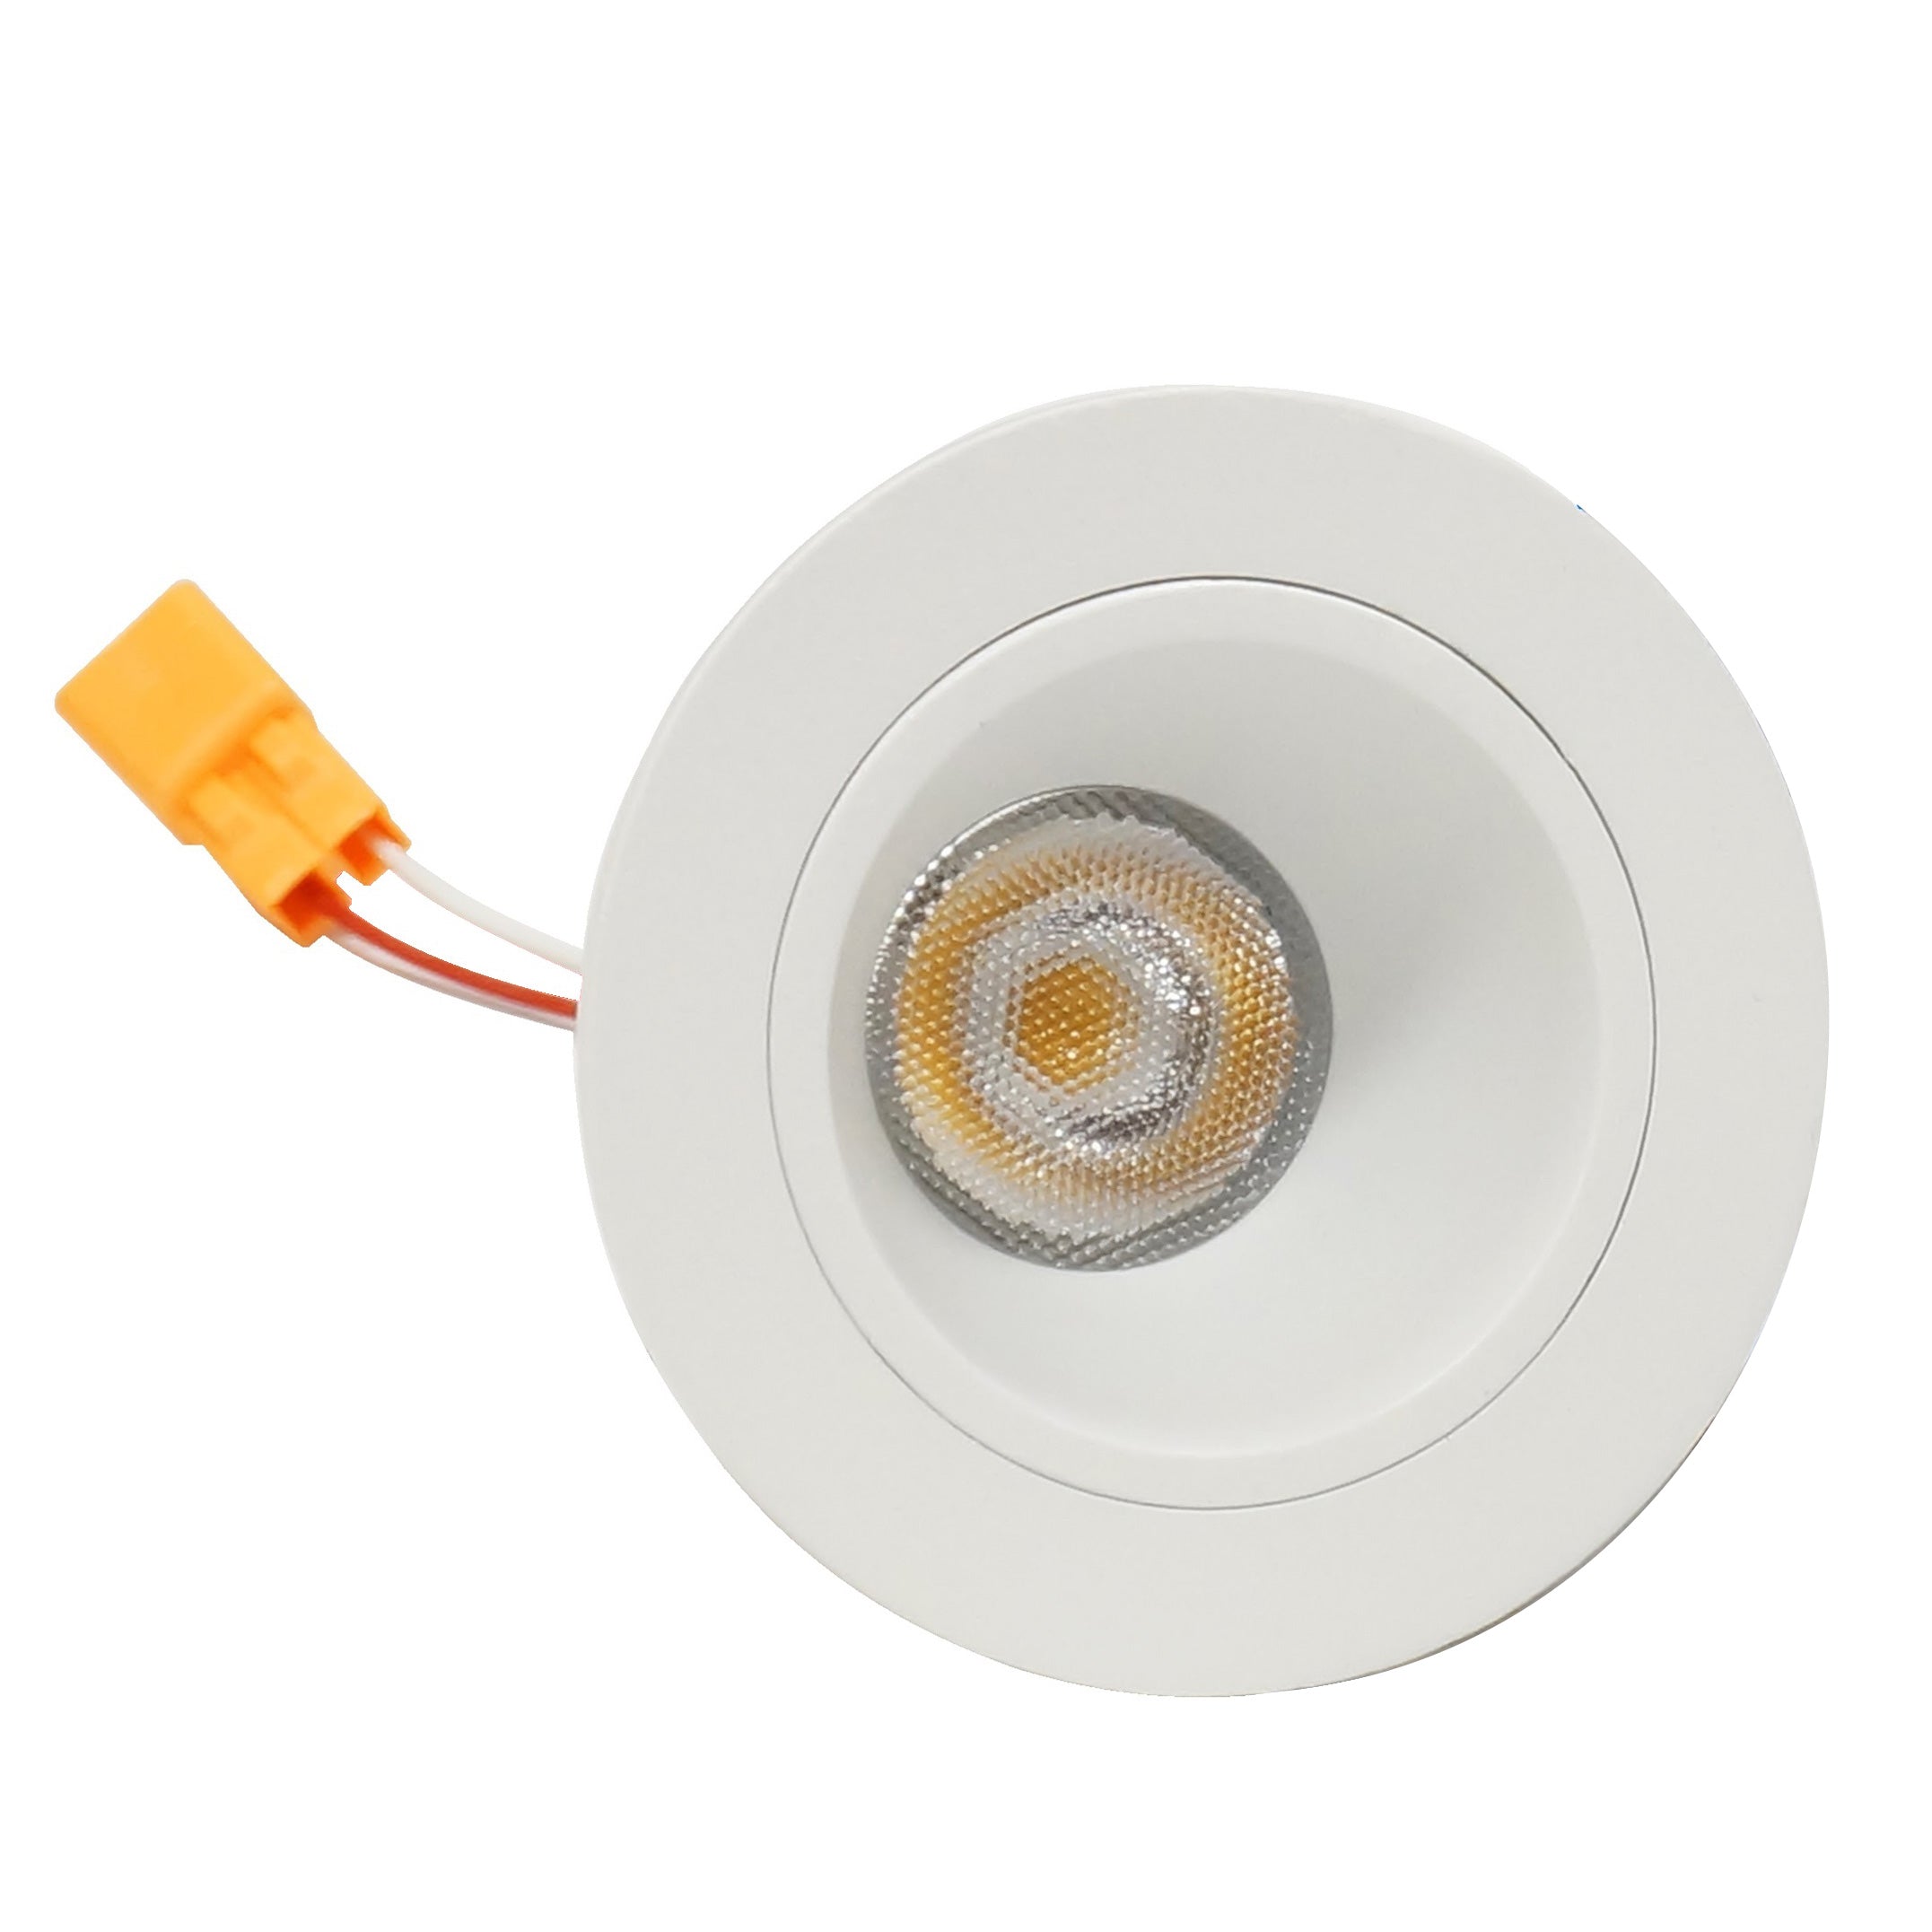 NICOR 2 in. LED Downlight Warm White 600Lm with White Trim